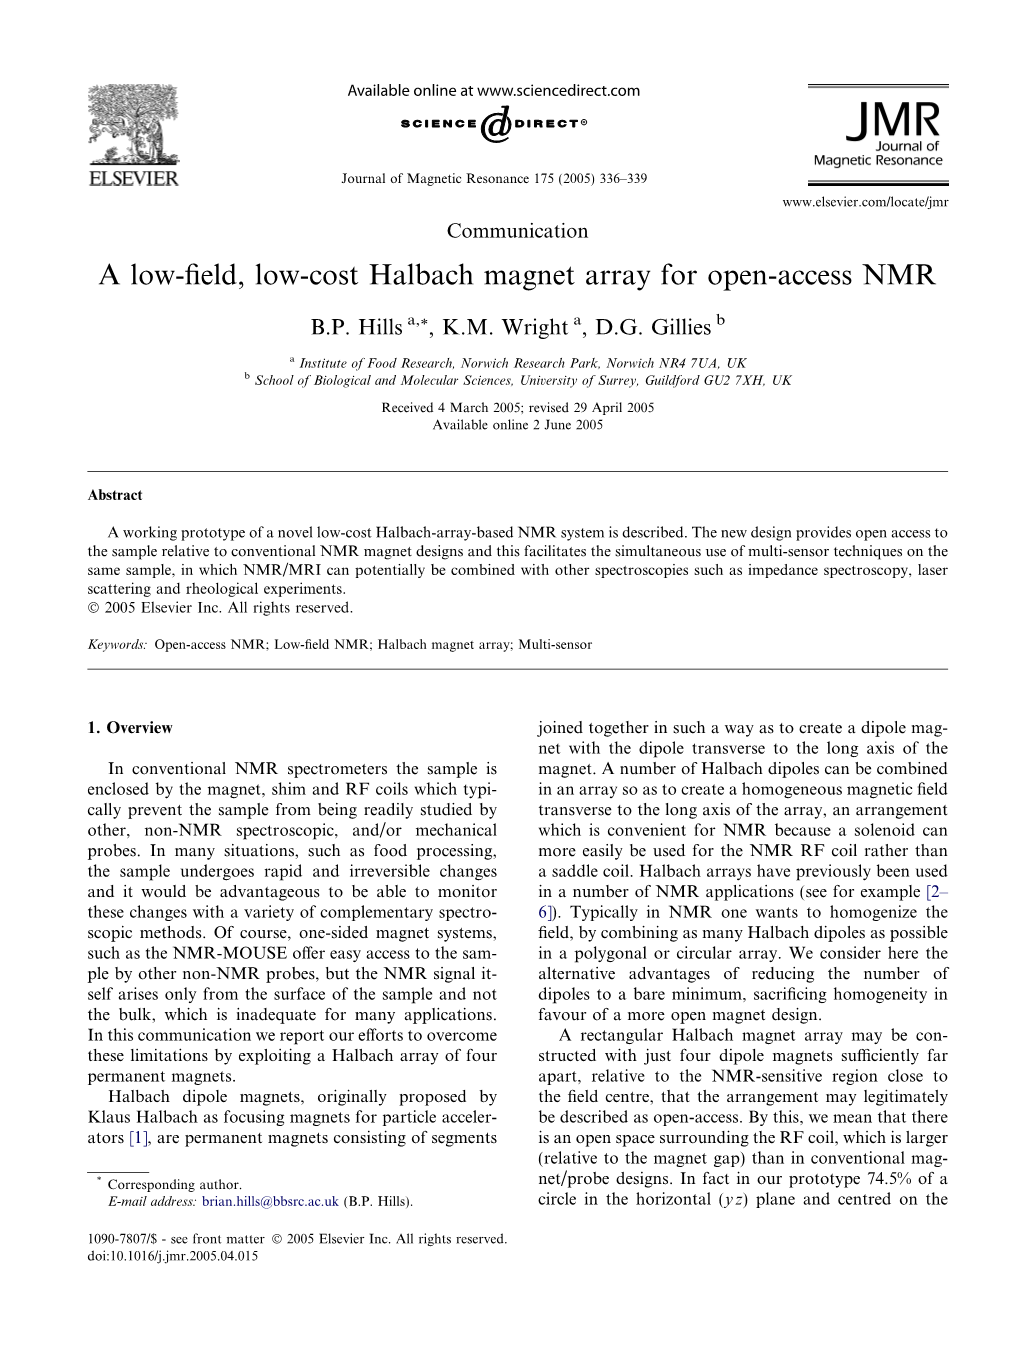 A Low-Field, Low-Cost Halbach Magnet Array for Open-Access